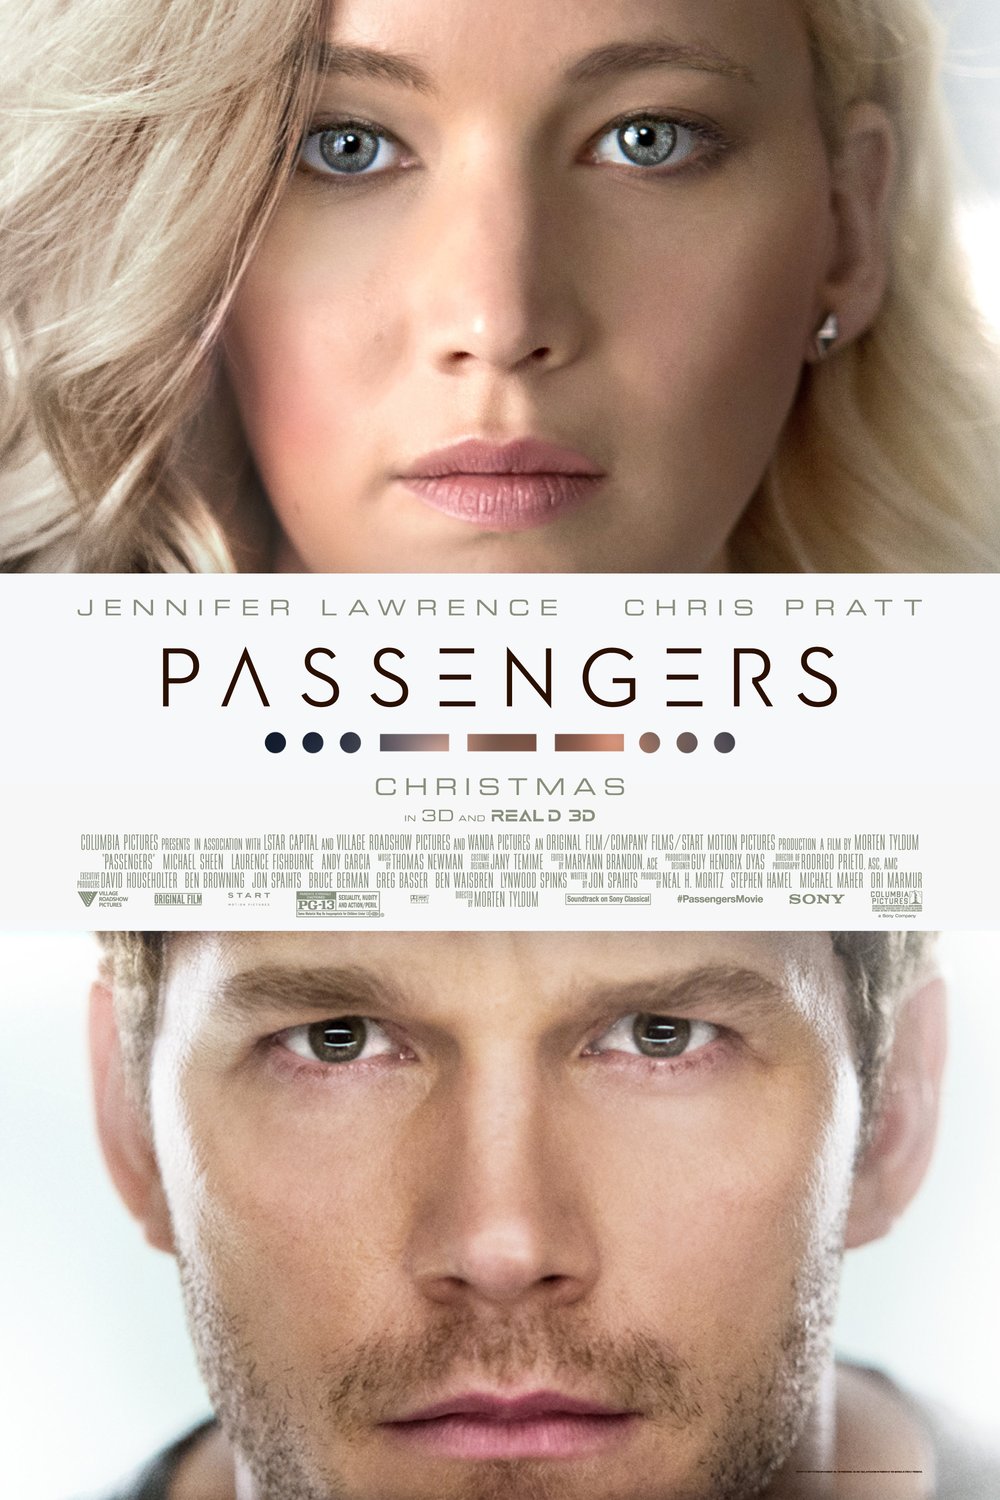 Poster of the movie Passengers